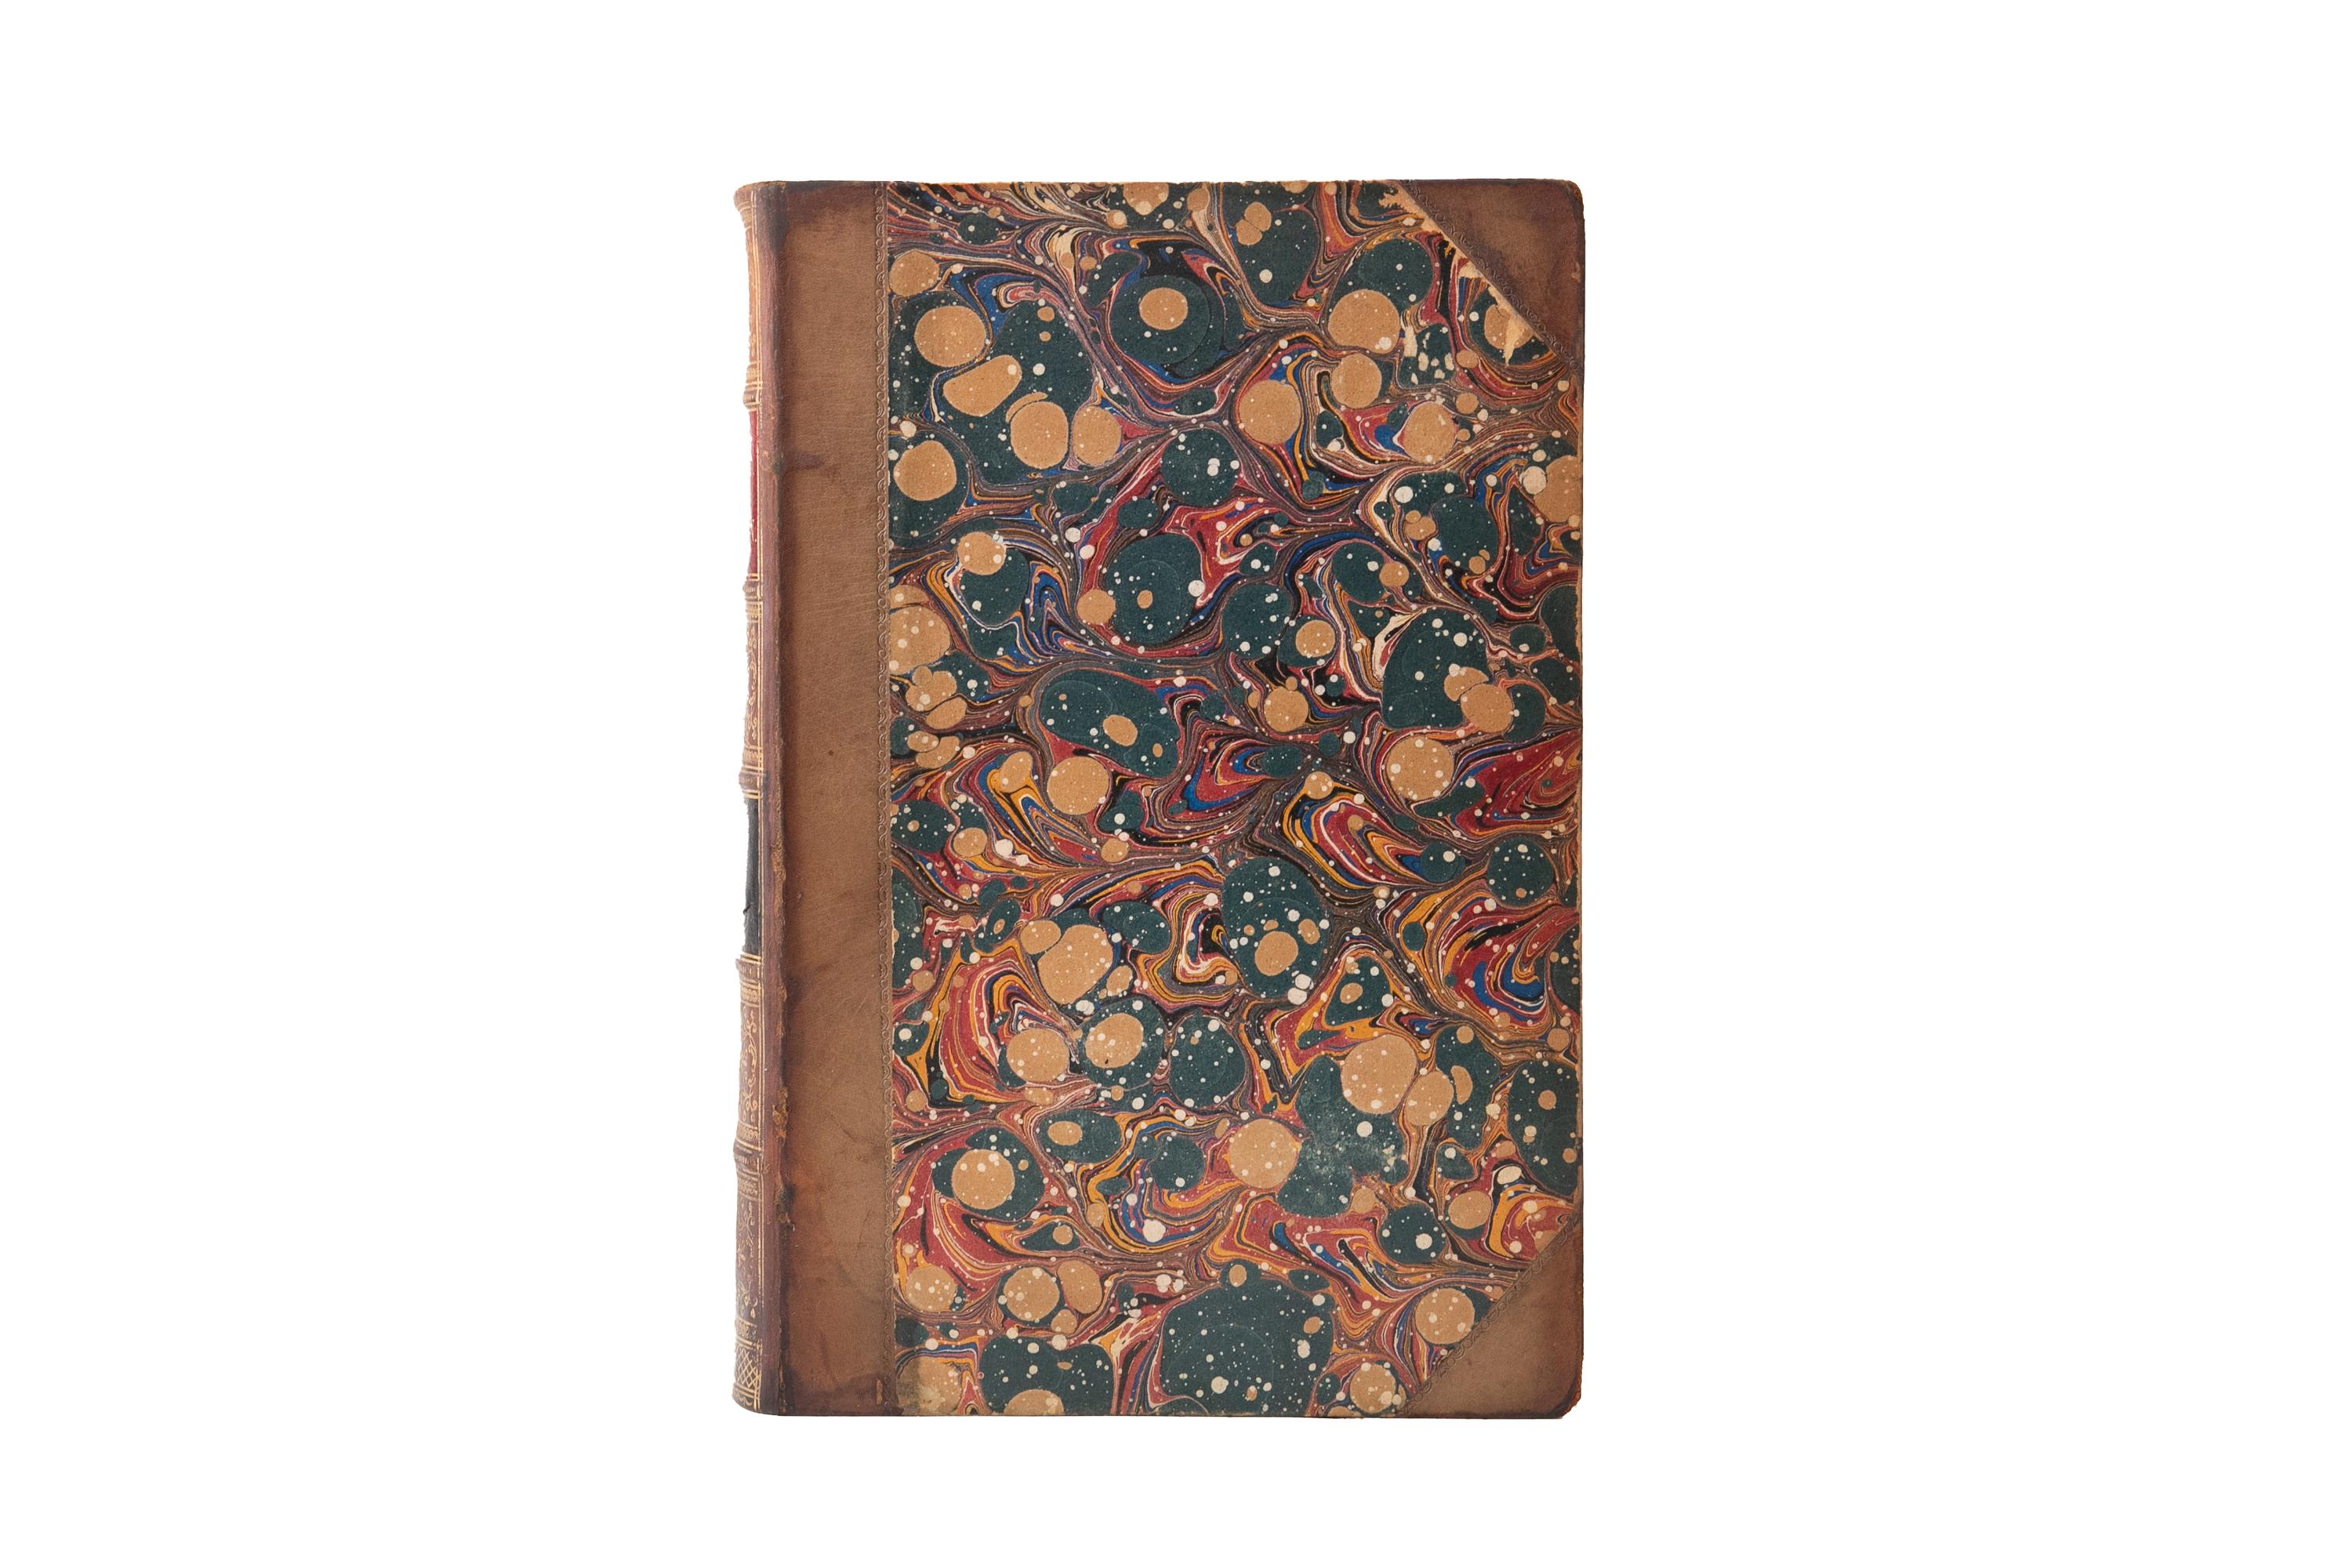 2 Volumes. B.J. Lossing, Pictorial Fieldbook of the Revolution. Bound in 3/4 tan calf and marbled boards. Raised band spines gilt-tooled with red and green morocco labels. All edged marbled with marbled endpapers. Illustrations by pen and pencil of